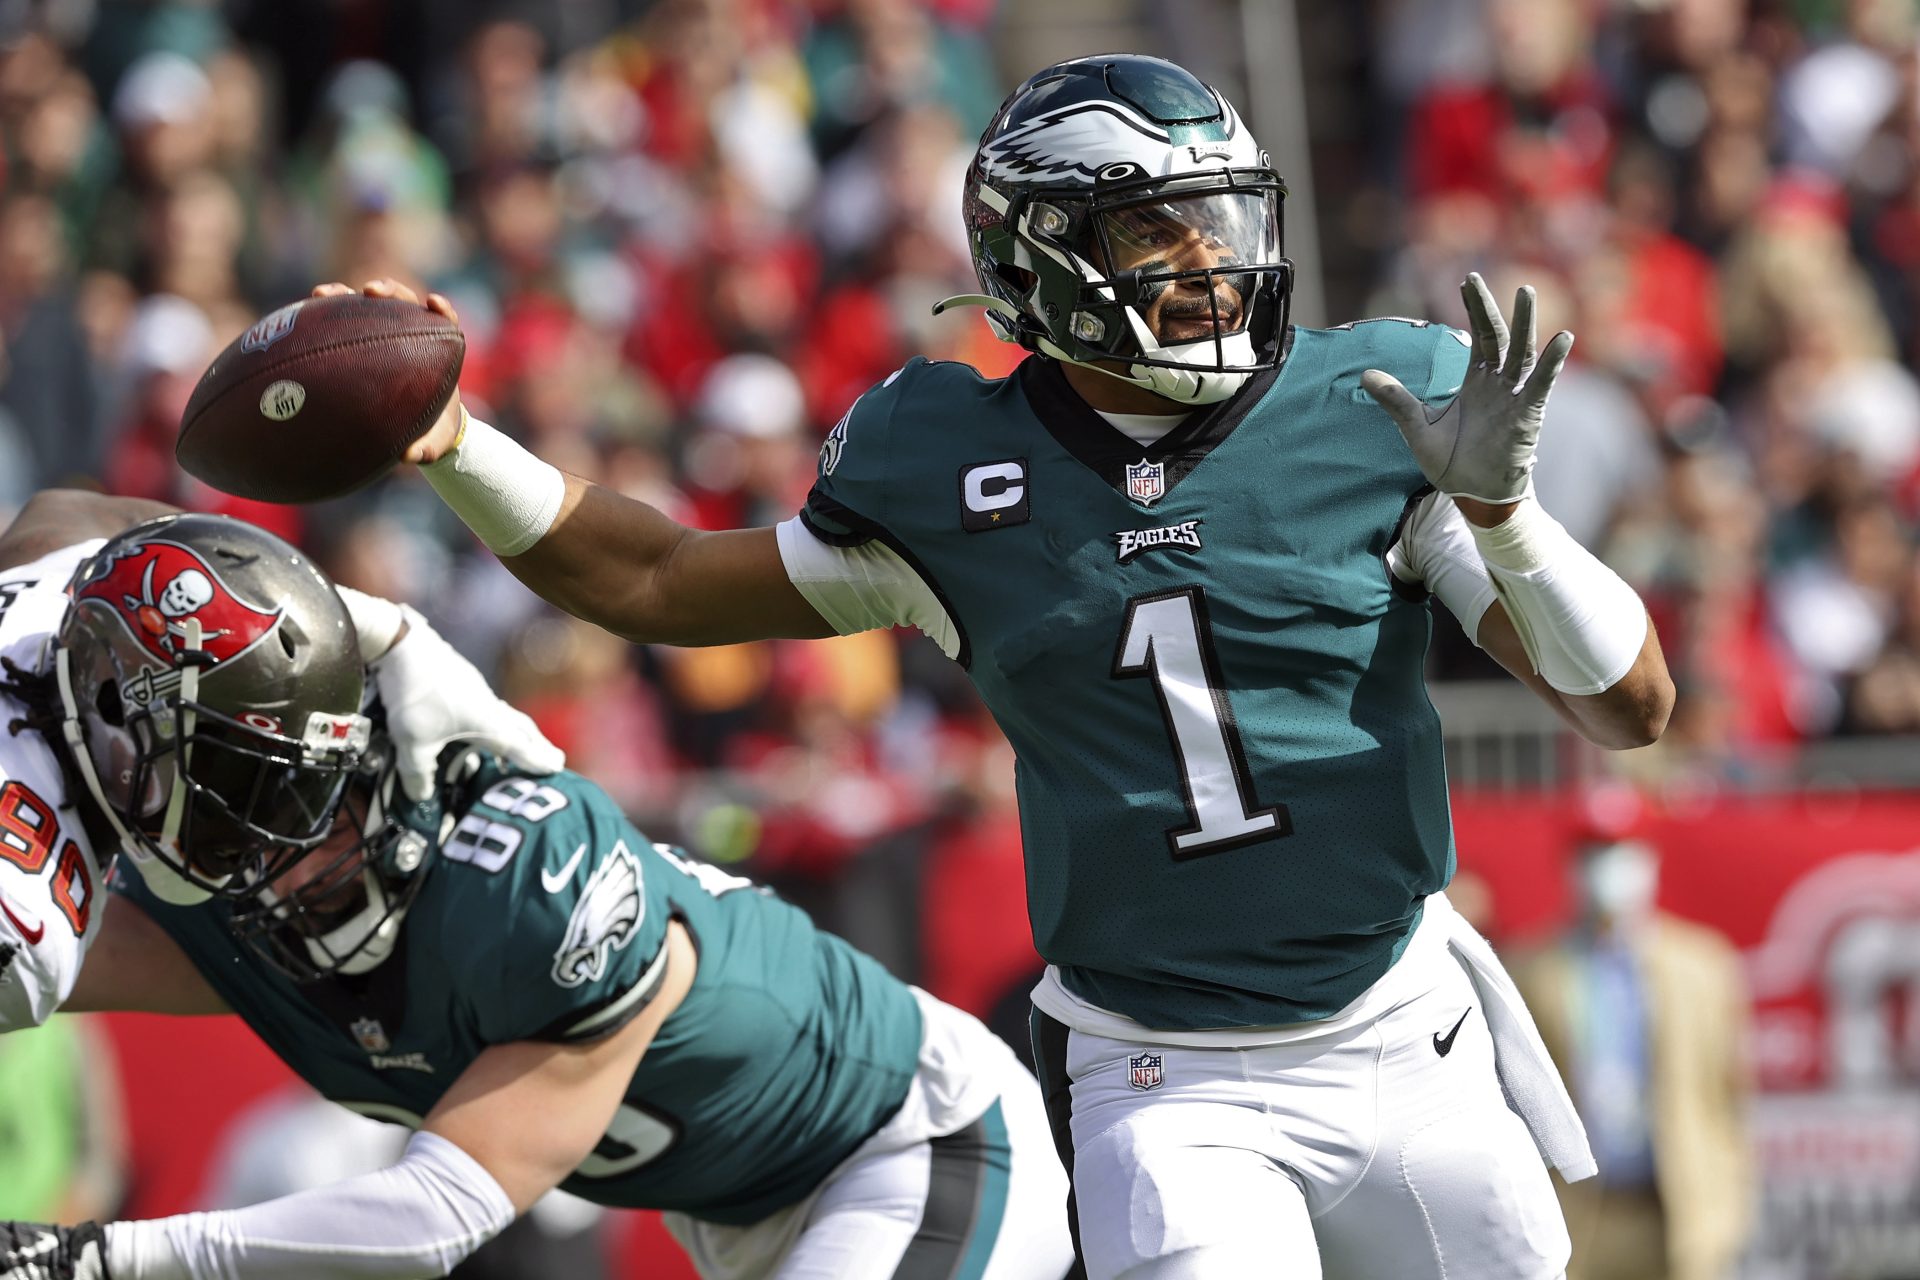 Philadelphia Eagles quarterback Jalen Hurts (1) throws a pass against the Tampa Bay Buccaneers during the first half of an NFL wild-card football game Sunday, Jan. 16, 2022, in Tampa, Fla.